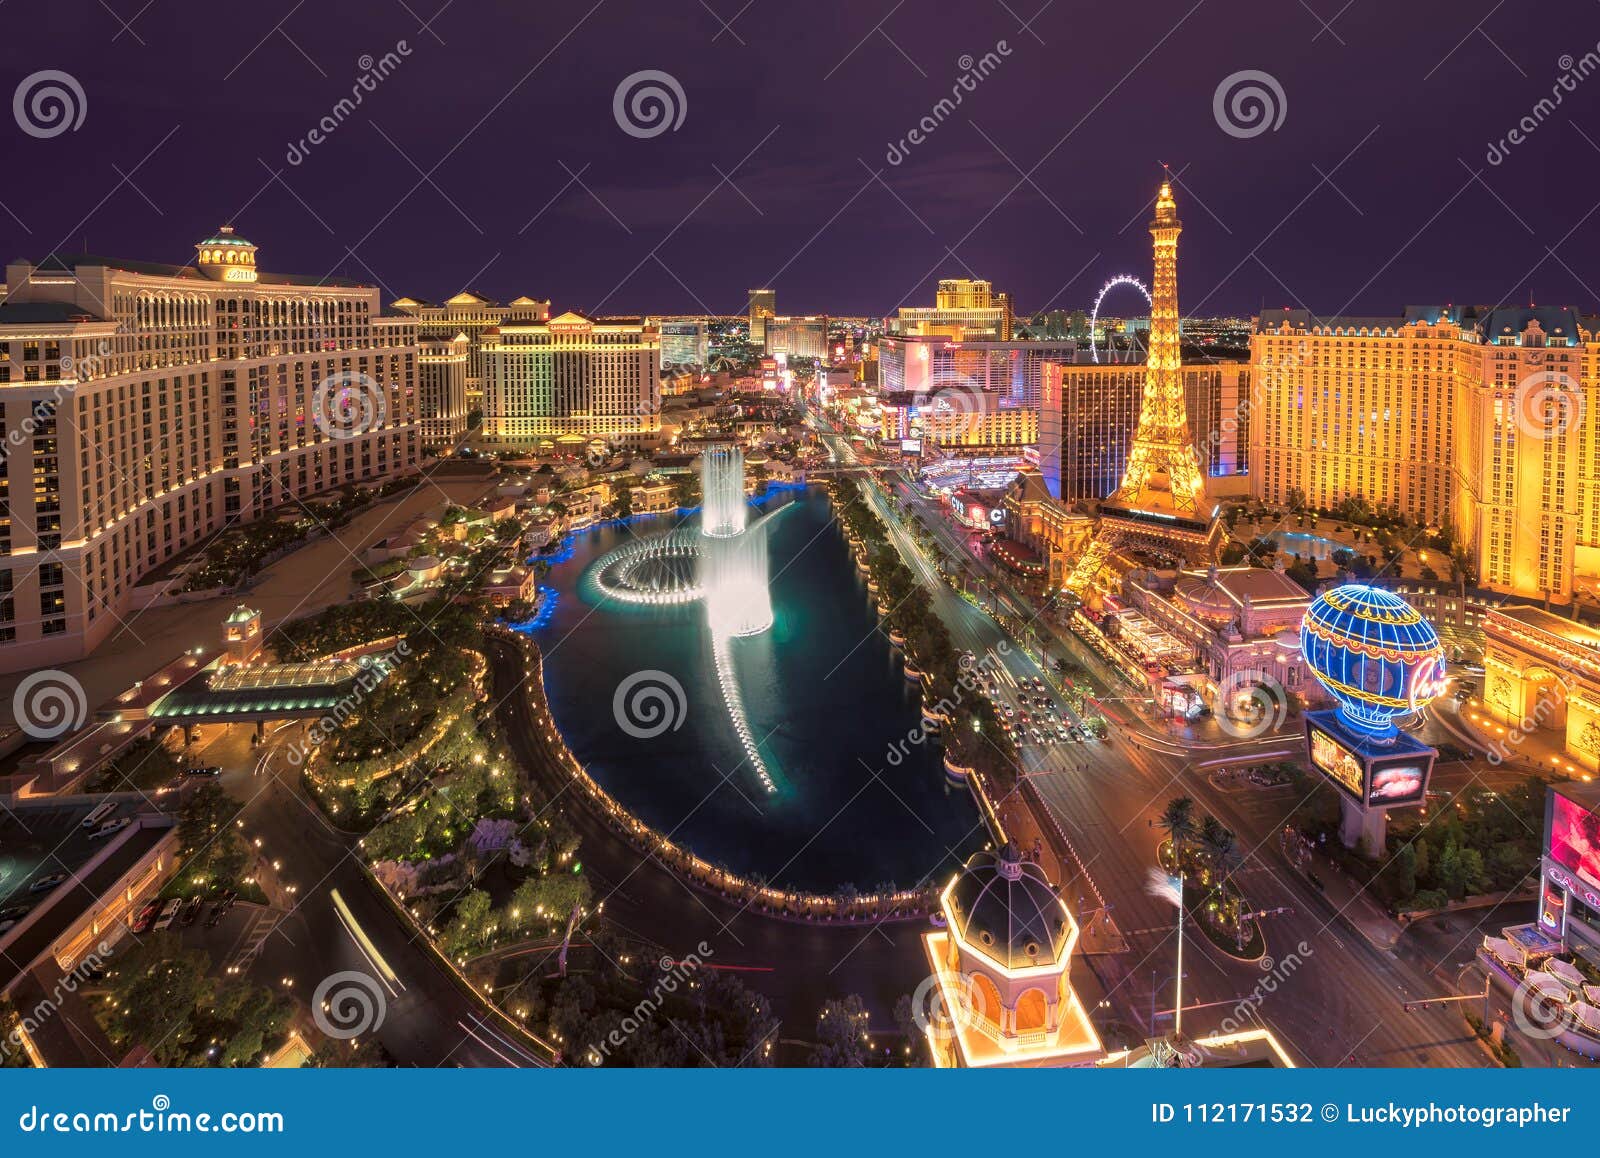 Aerial view of Las Vegas Strip at night. Las Vegas Strip skyline at night on July 25, 2017 in Las Vegas, Nevada. The Strip is home to the largest hotels and casinos in the world.